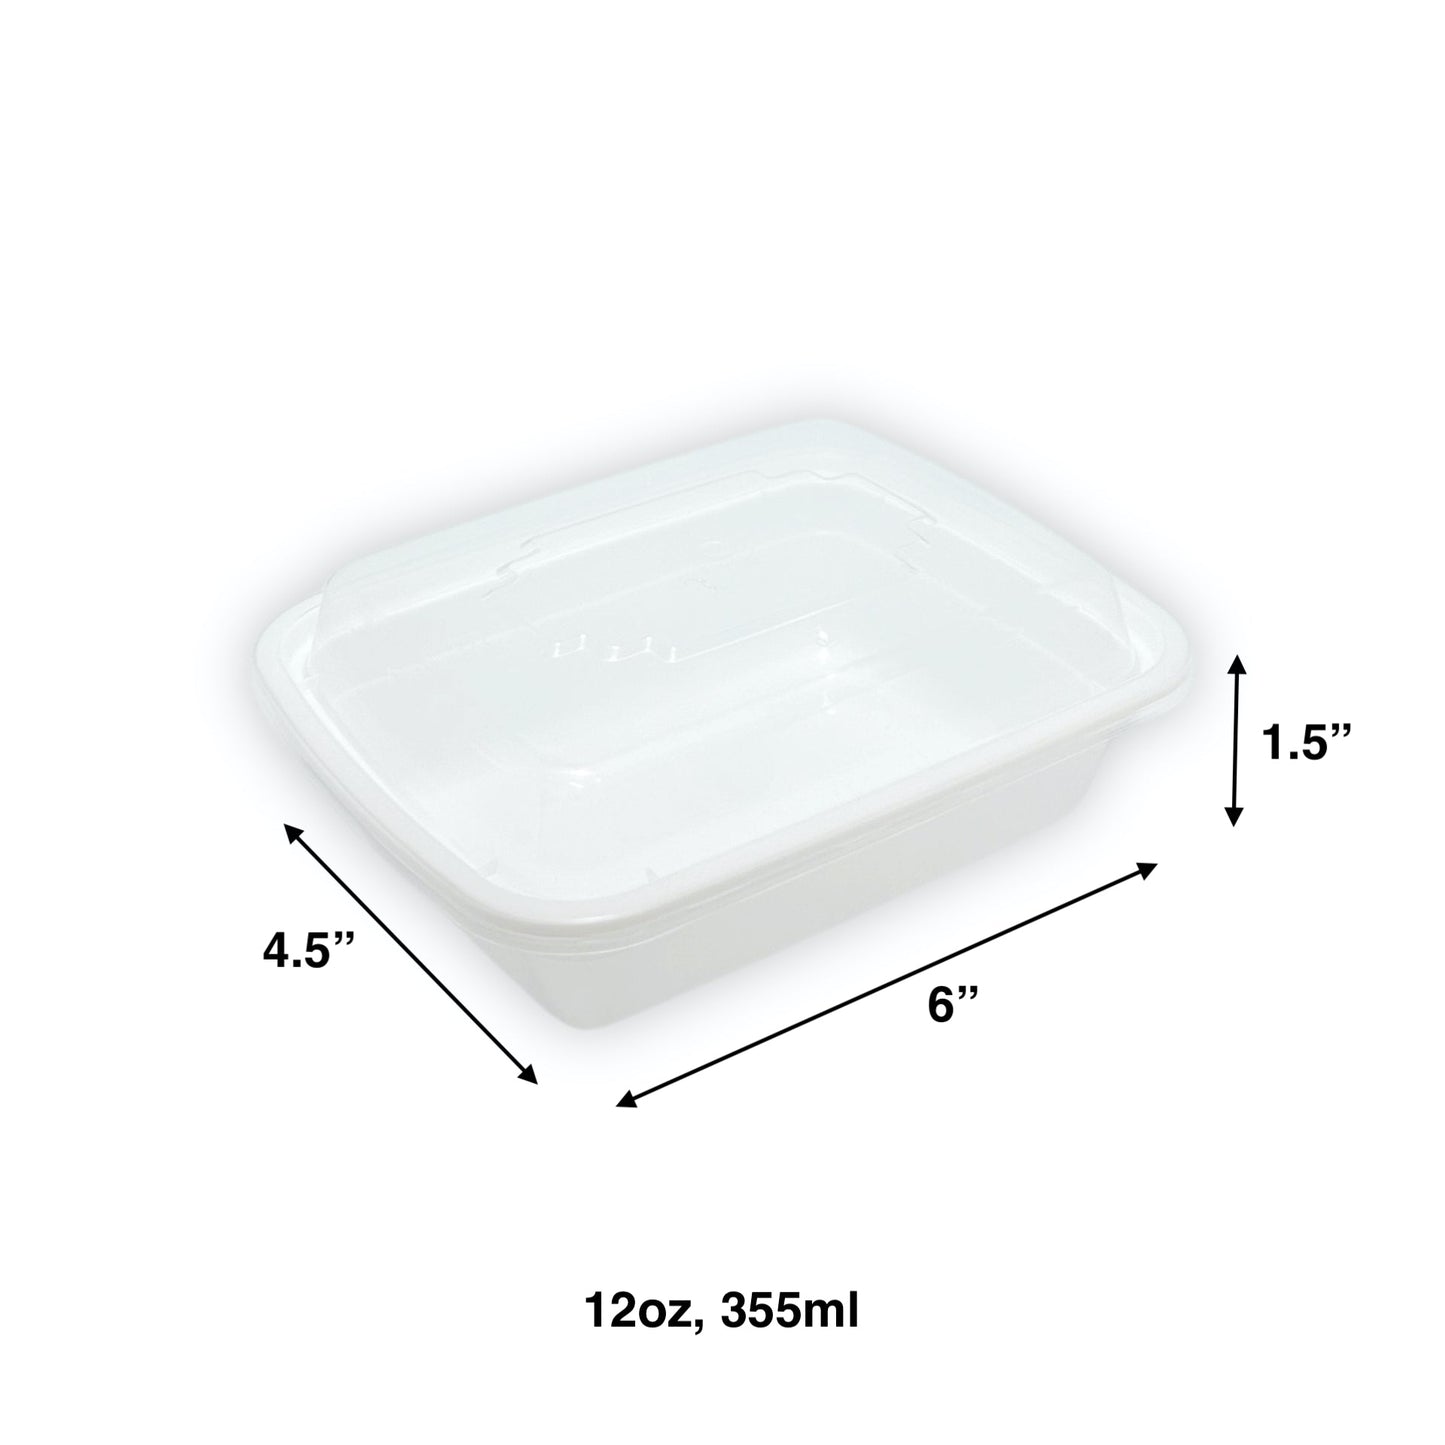 KIS-KY12G | 150sets 12oz, 355ml White PP Rectangle Container with Clear Lids Combo; $0.102/set